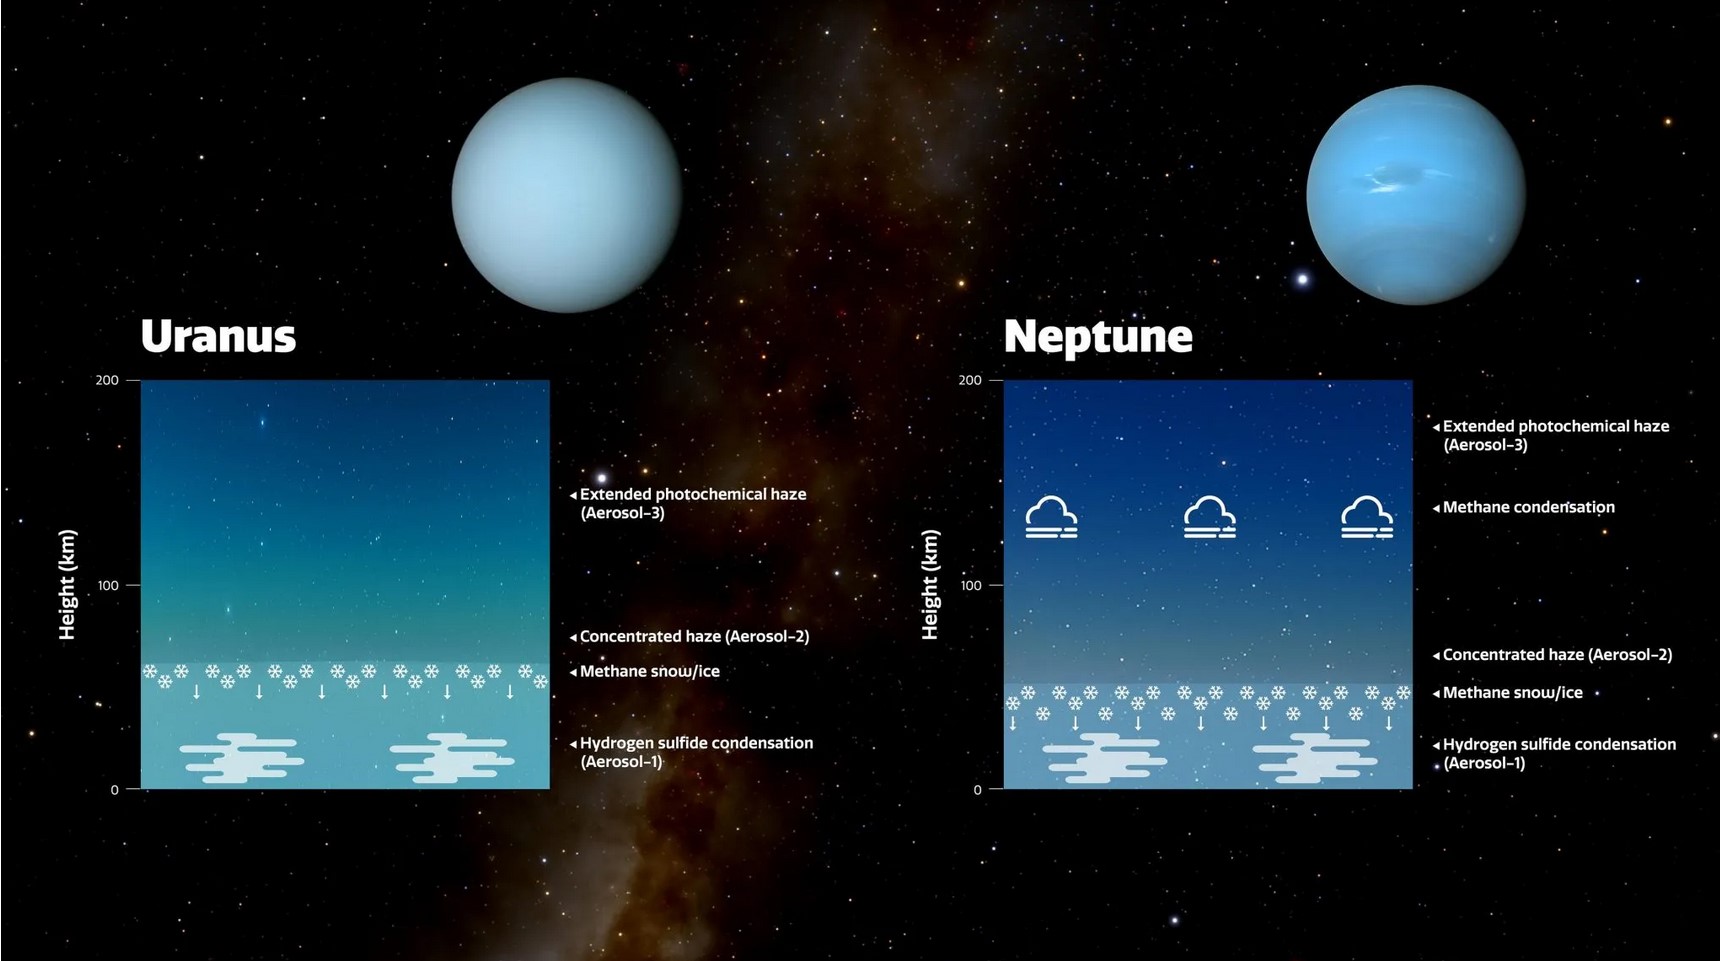 The colors of Uranus and Neptune in the solar system